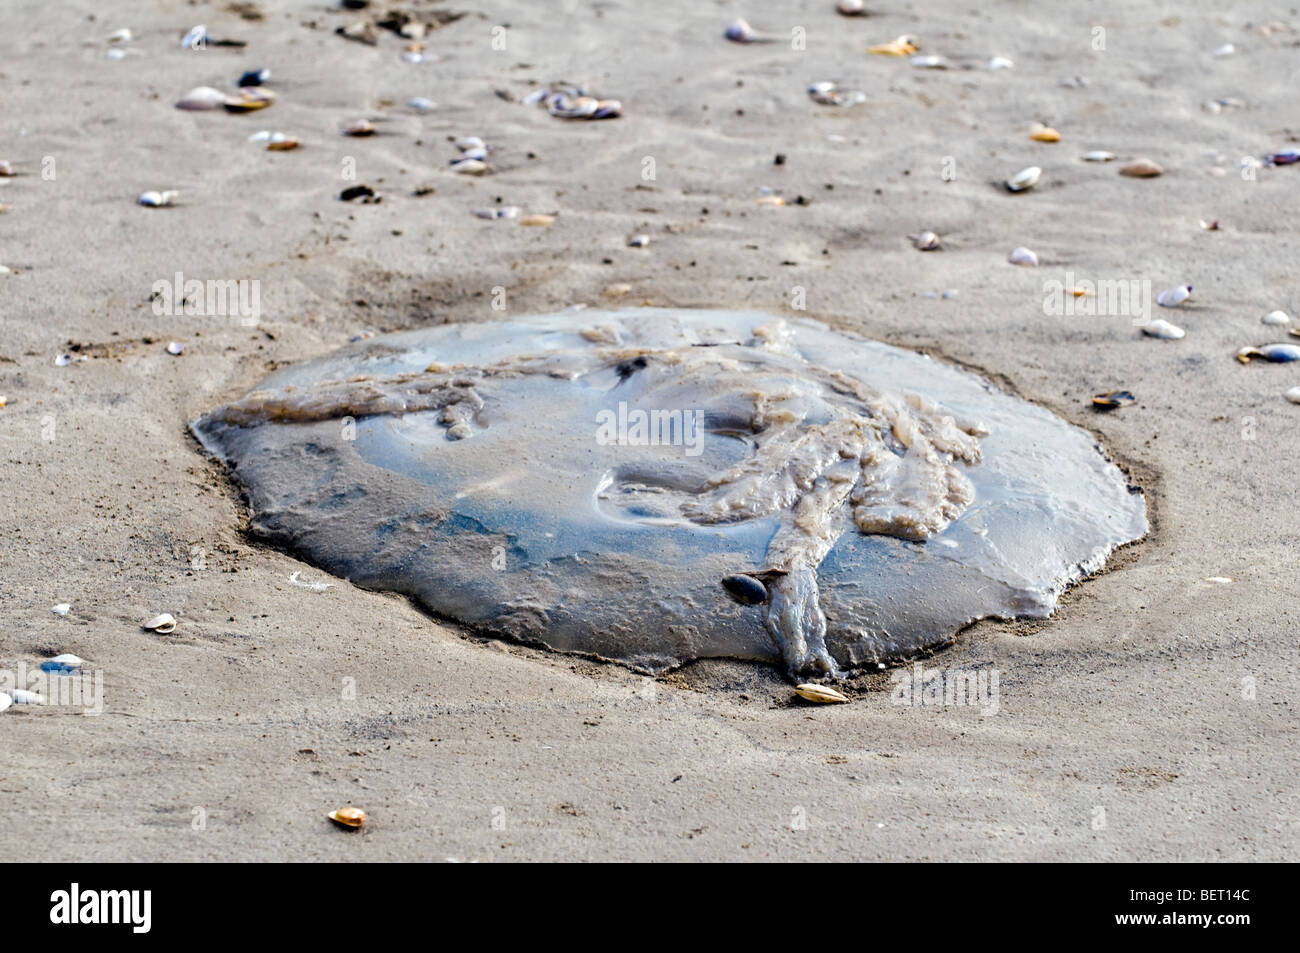 Washed up dead jelly fish found on beach in Pembrey, Wales. Stock Photo